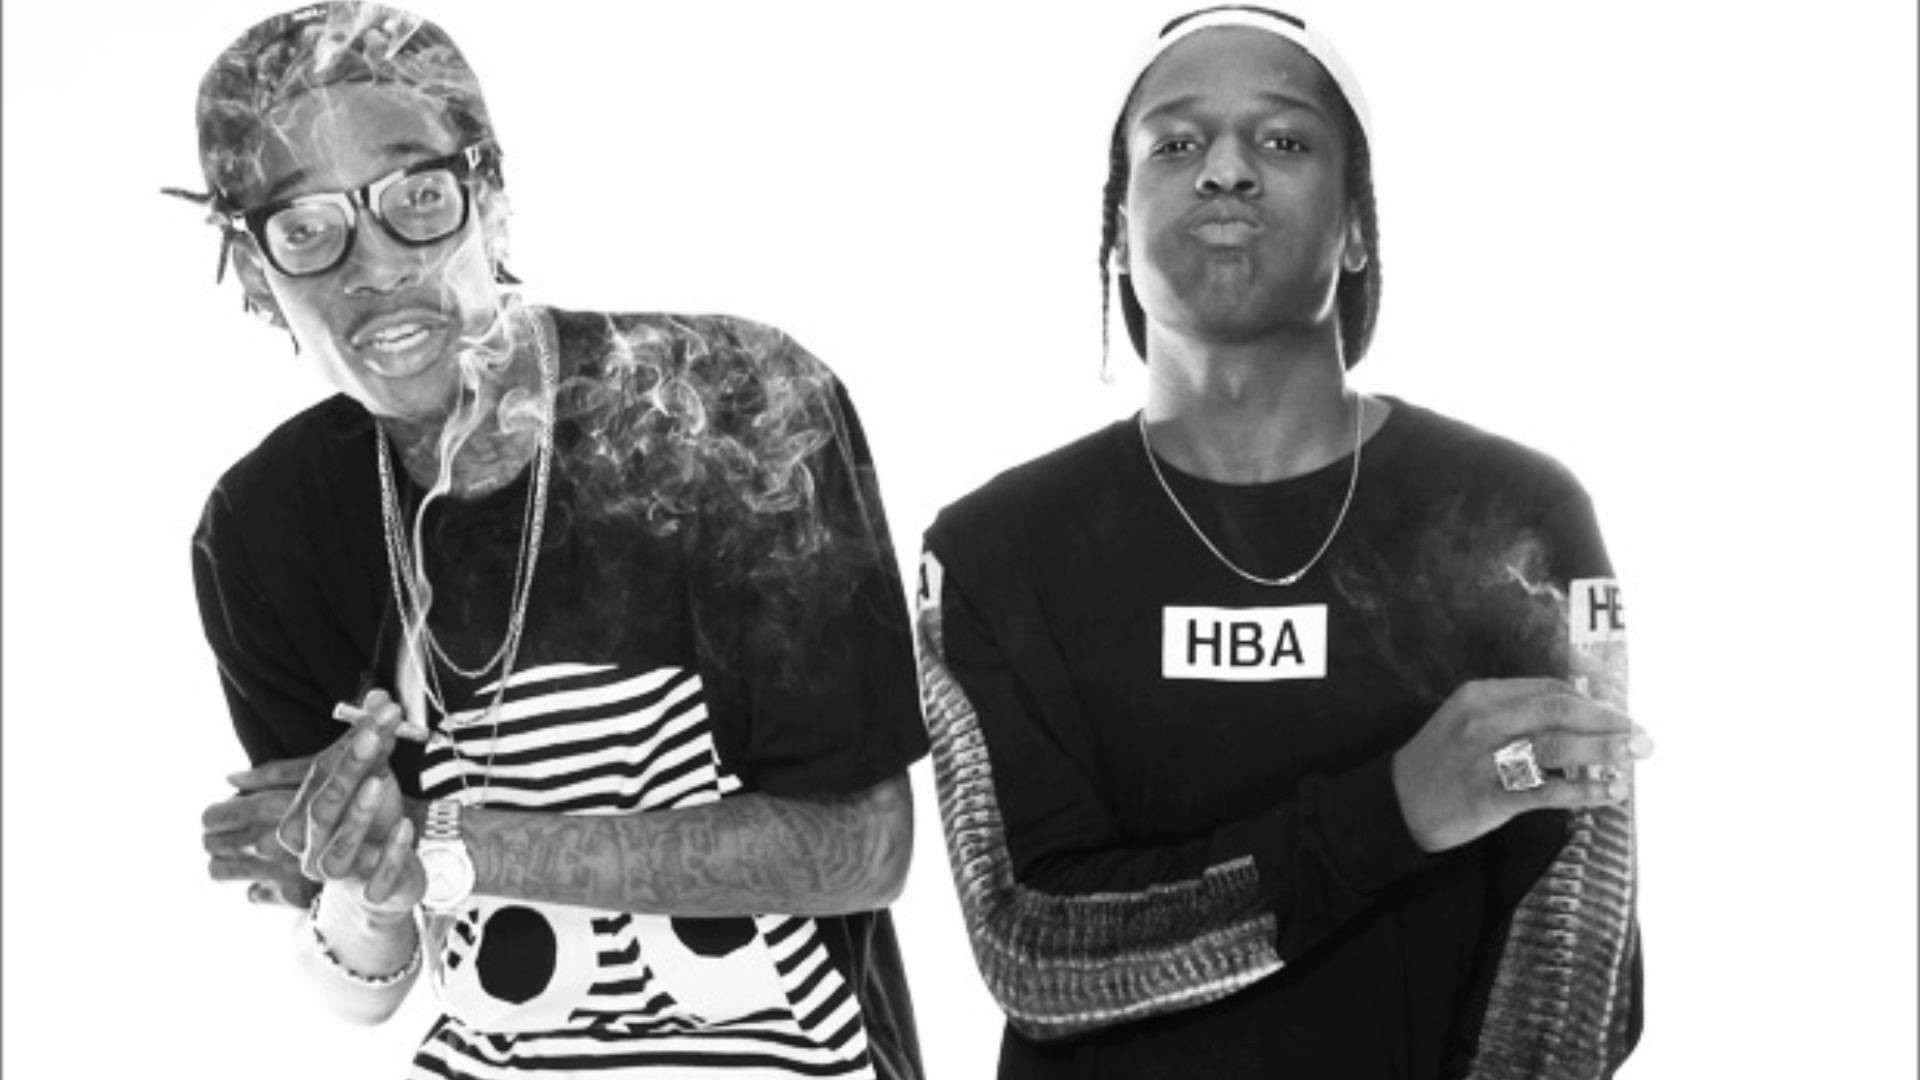 1000 Images About Lord Pretty Flacko On Pinterest - Asap Rocky And Wiz Khalifa - HD Wallpaper 